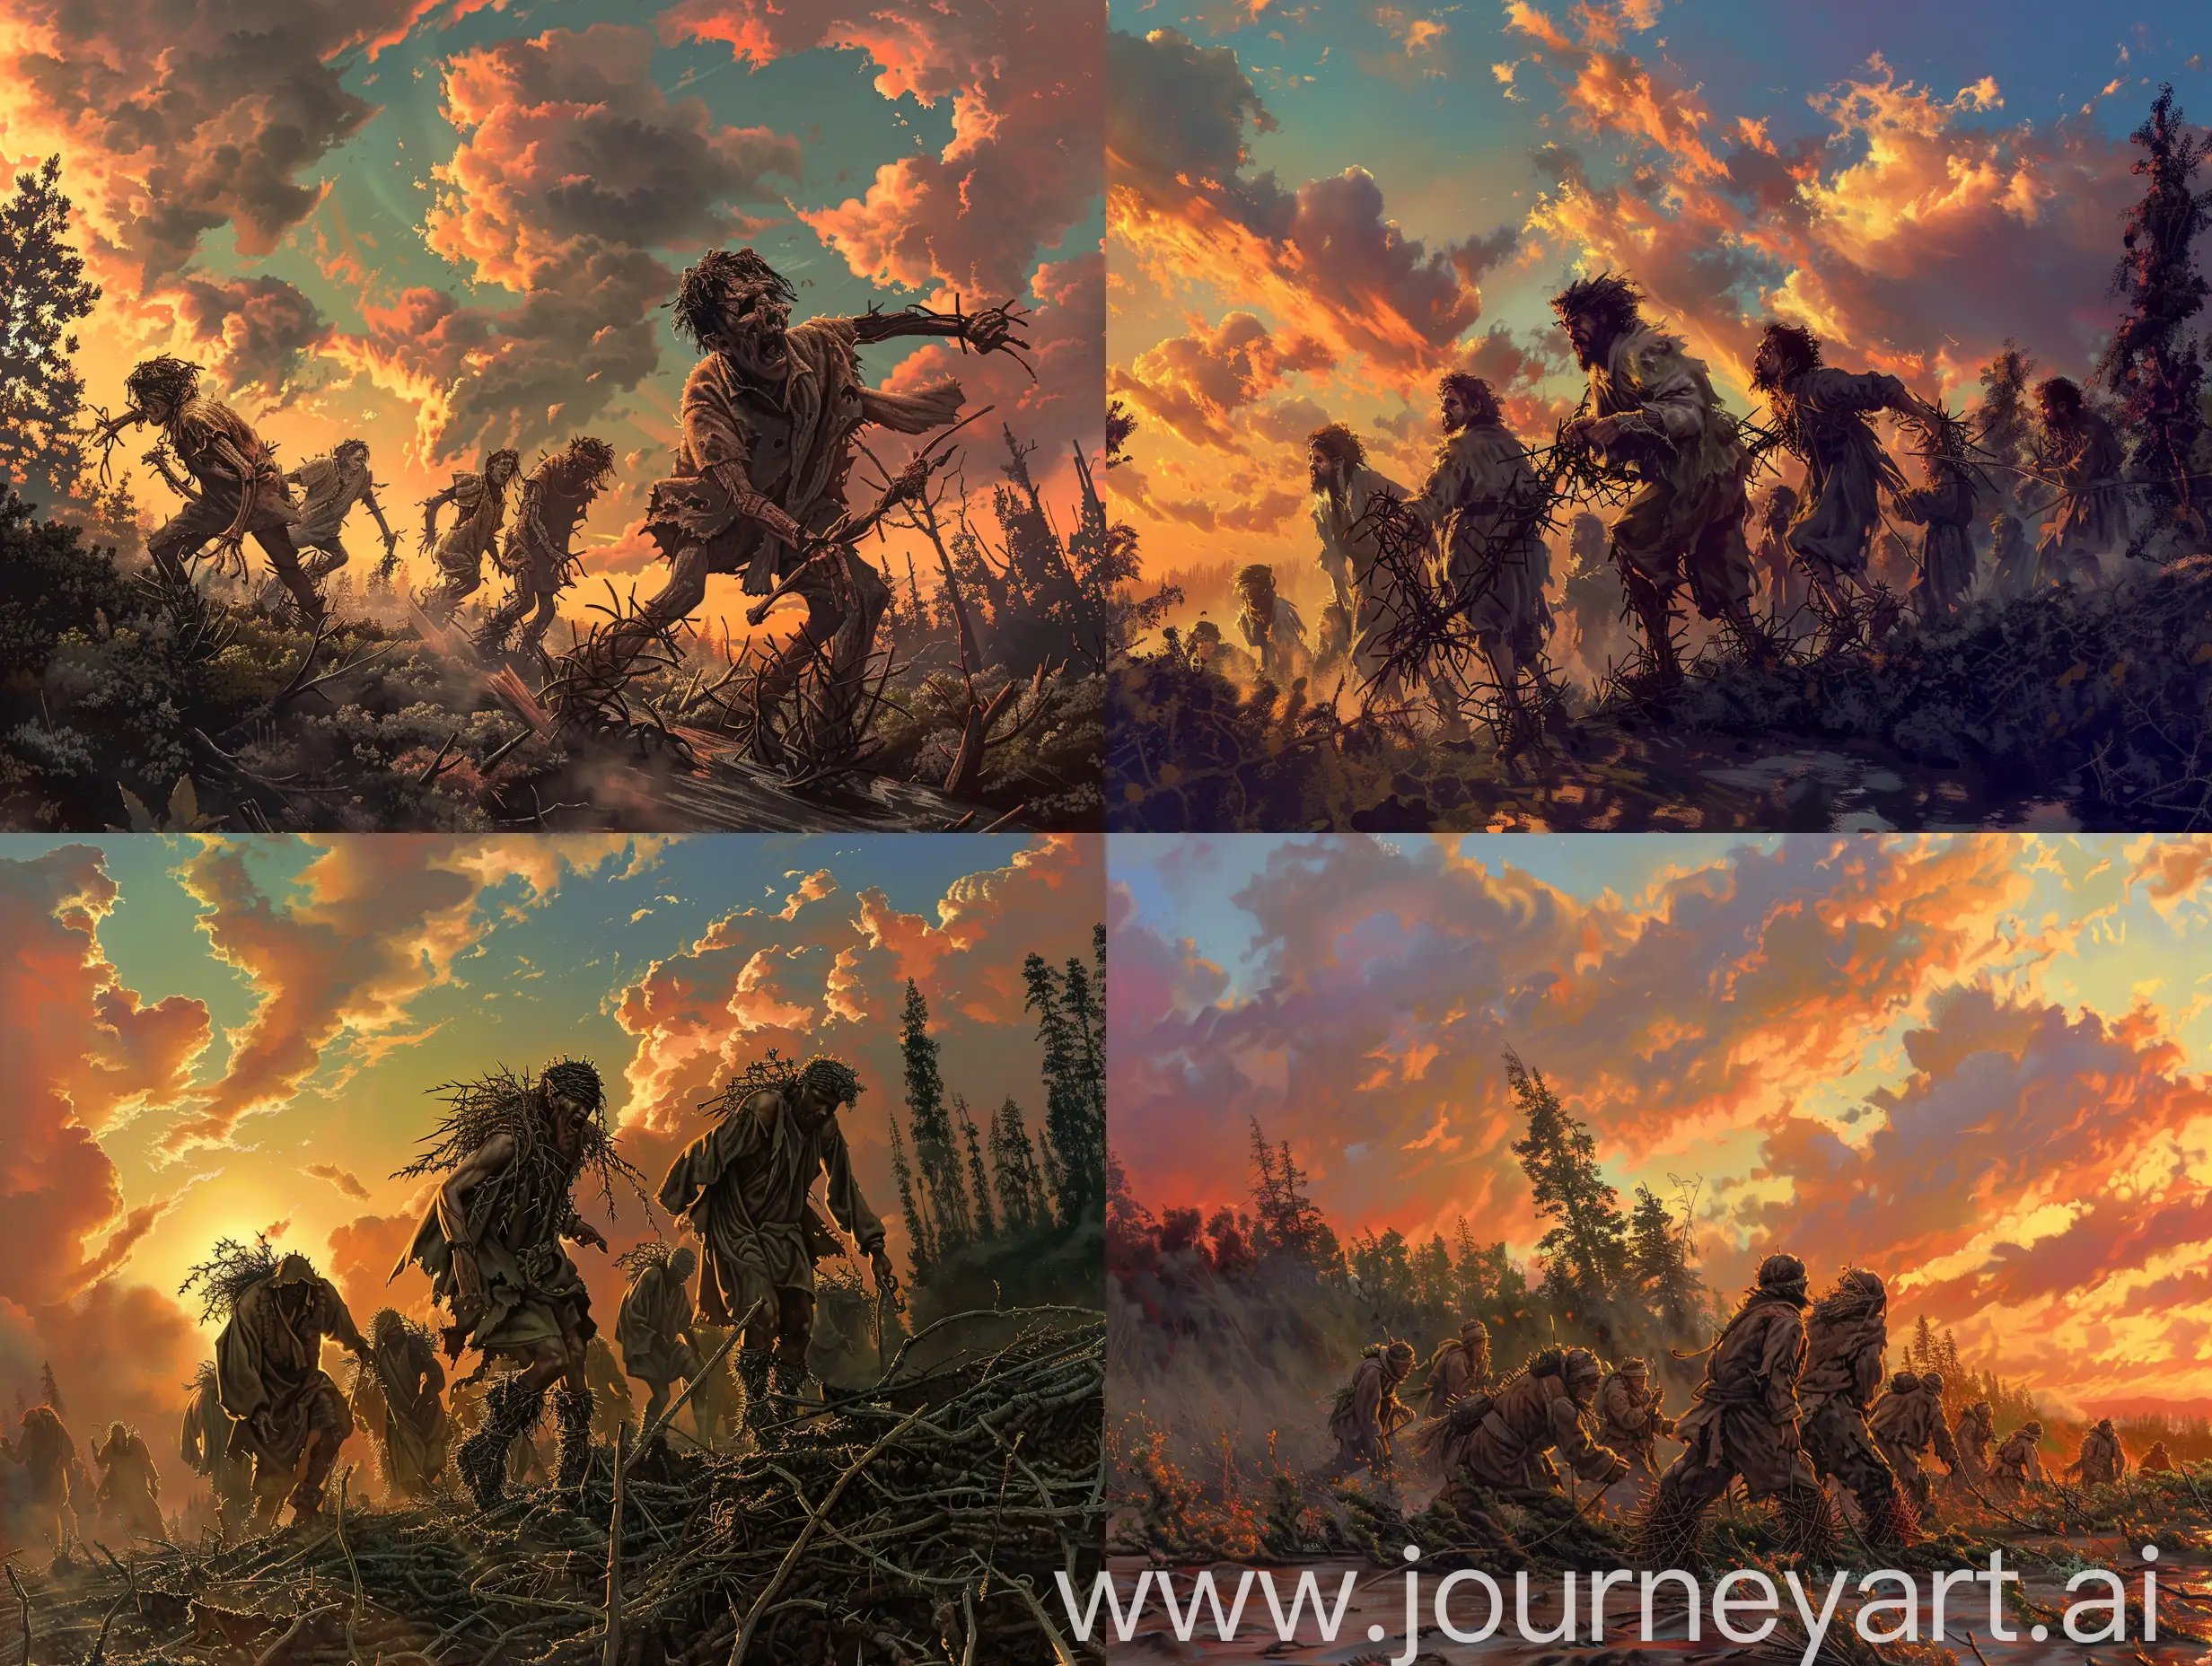 A group of travelers is struggling to cross a thorny area. They are dressed in tattered clothes, with shoes woven from thorns on their feet. Despite the difficult journey, their faces are filled with determination. Their goal is the forest in the distance, which is full of unknowns and hope. The clouds in the sky are dyed orange by the setting sun, adding a touch of magnificence to their journey.